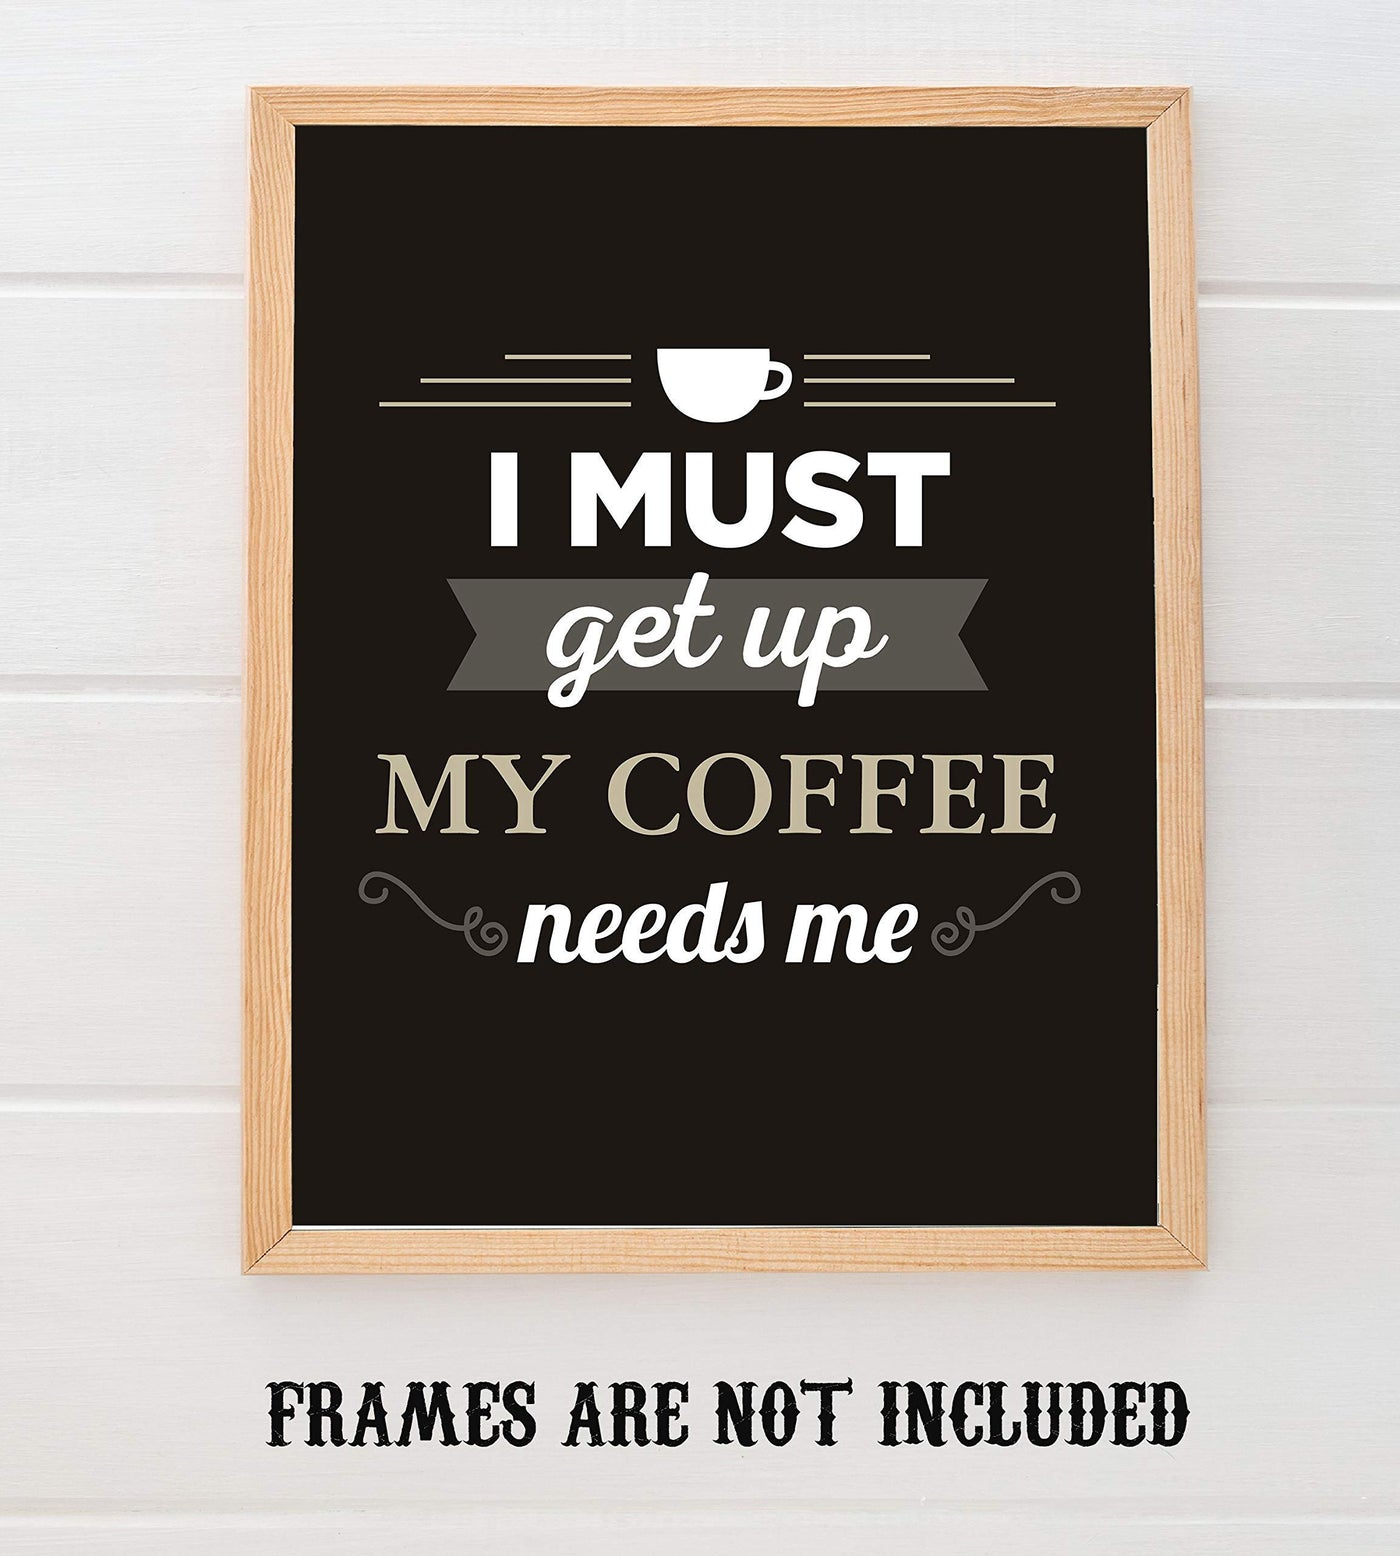 I Must Get Up-My Coffee Needs Me- Funny Coffee Sign - 8 x 10" Wall Art Print-Ready to Frame. Humorous Wall Decor for Home-Kitchen-Office-Restaurant-Cafe. Perfect Fun Gift for Coffee Lovers!